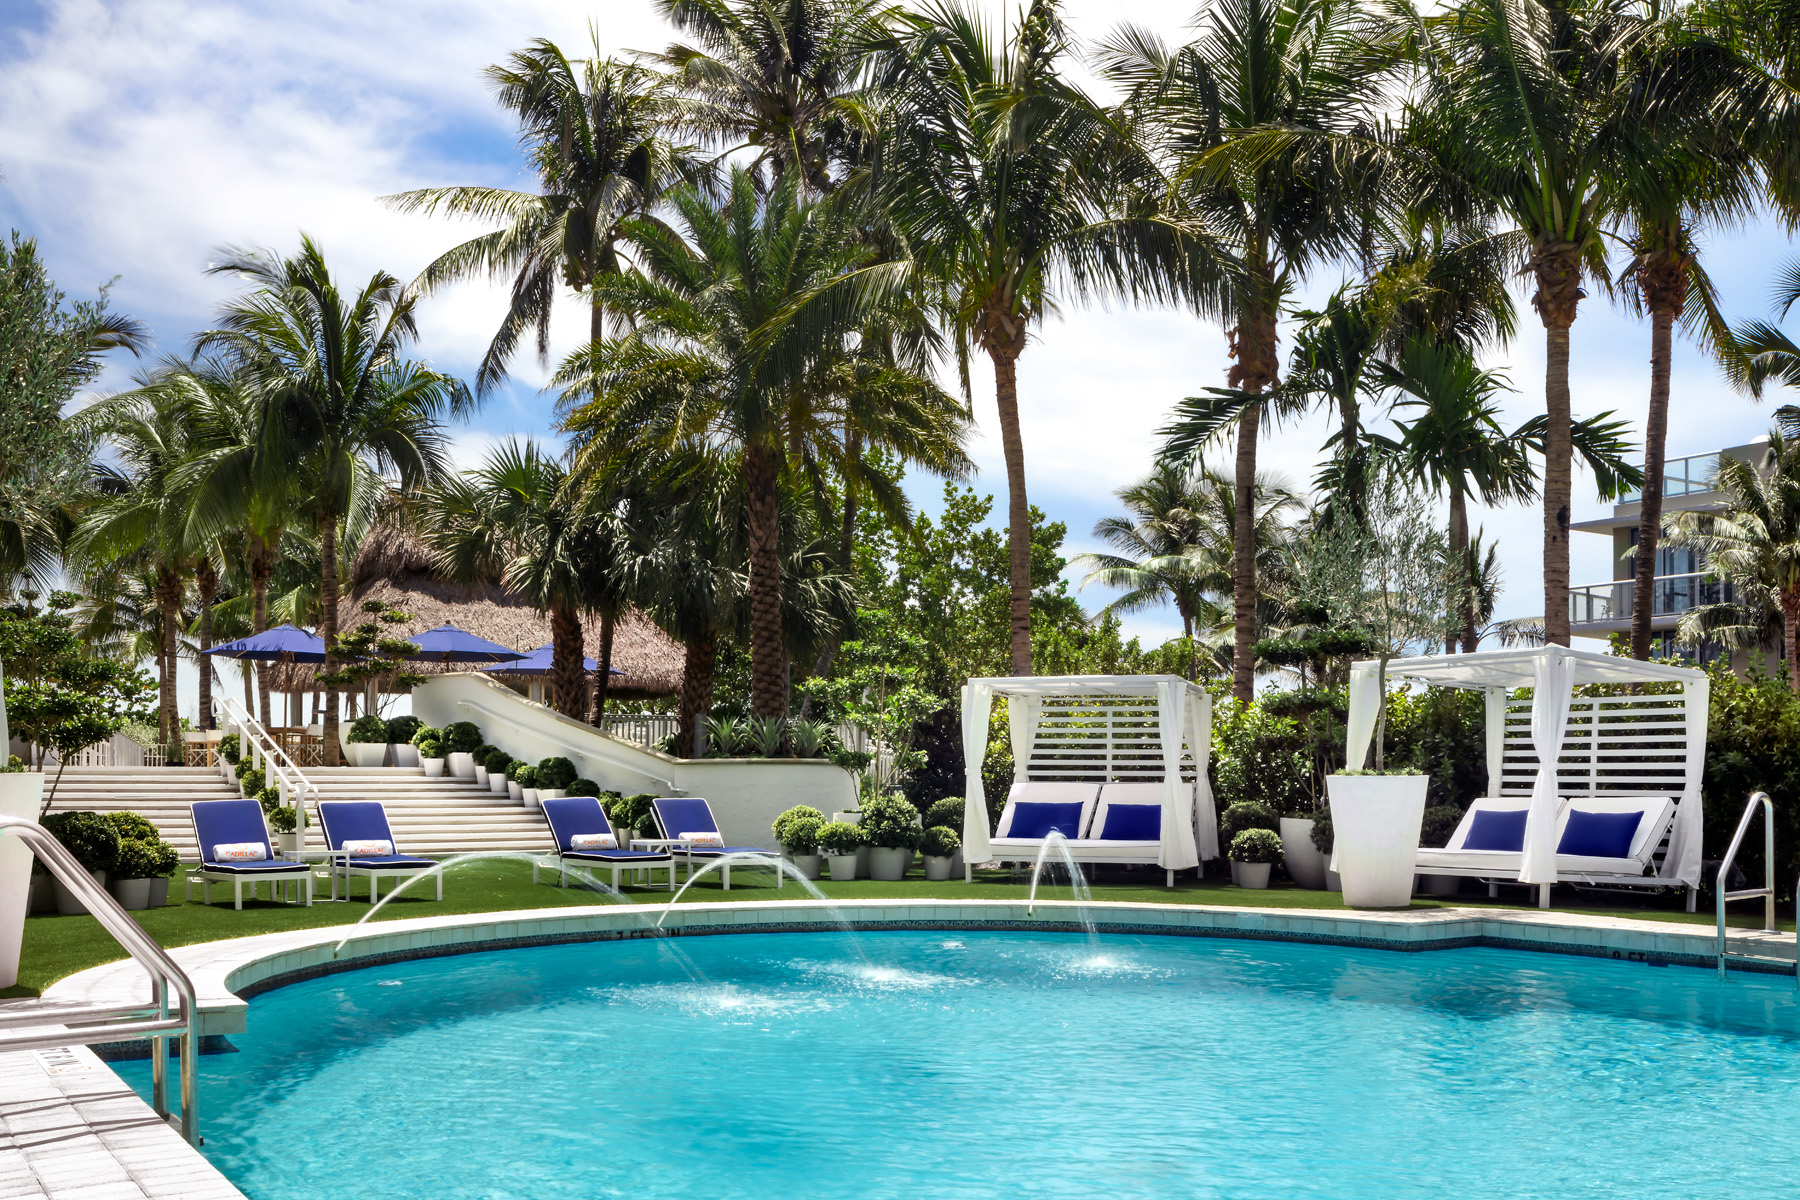 The Cadillac Hotel & Beach Club, Miami, FL has implemented the Rest Assured program.